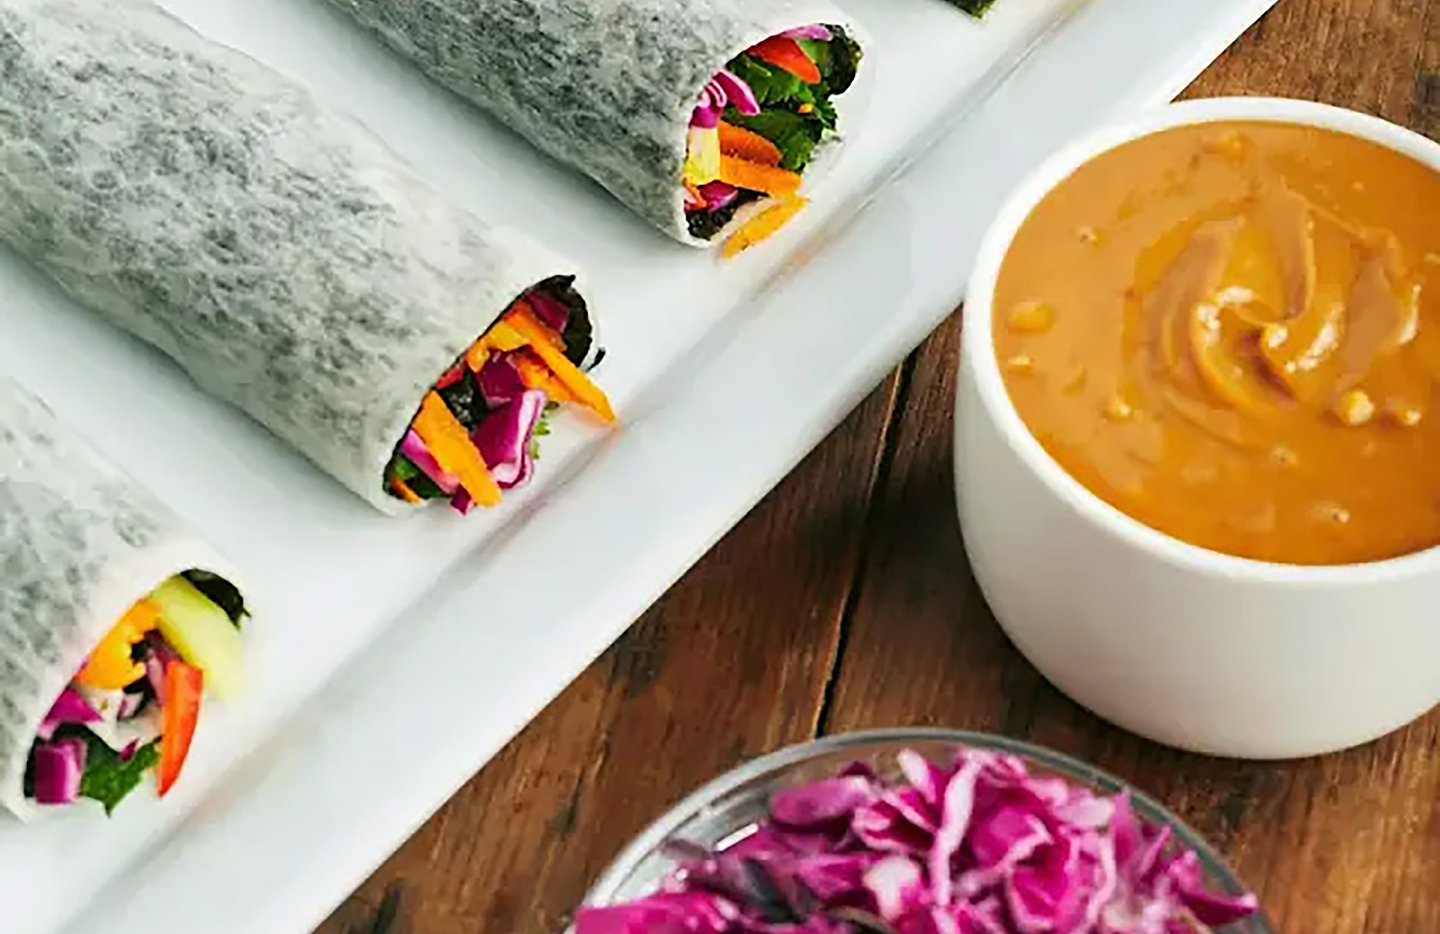 Rainbow spring rolls with shredded cabbage and peanut dipping sauce